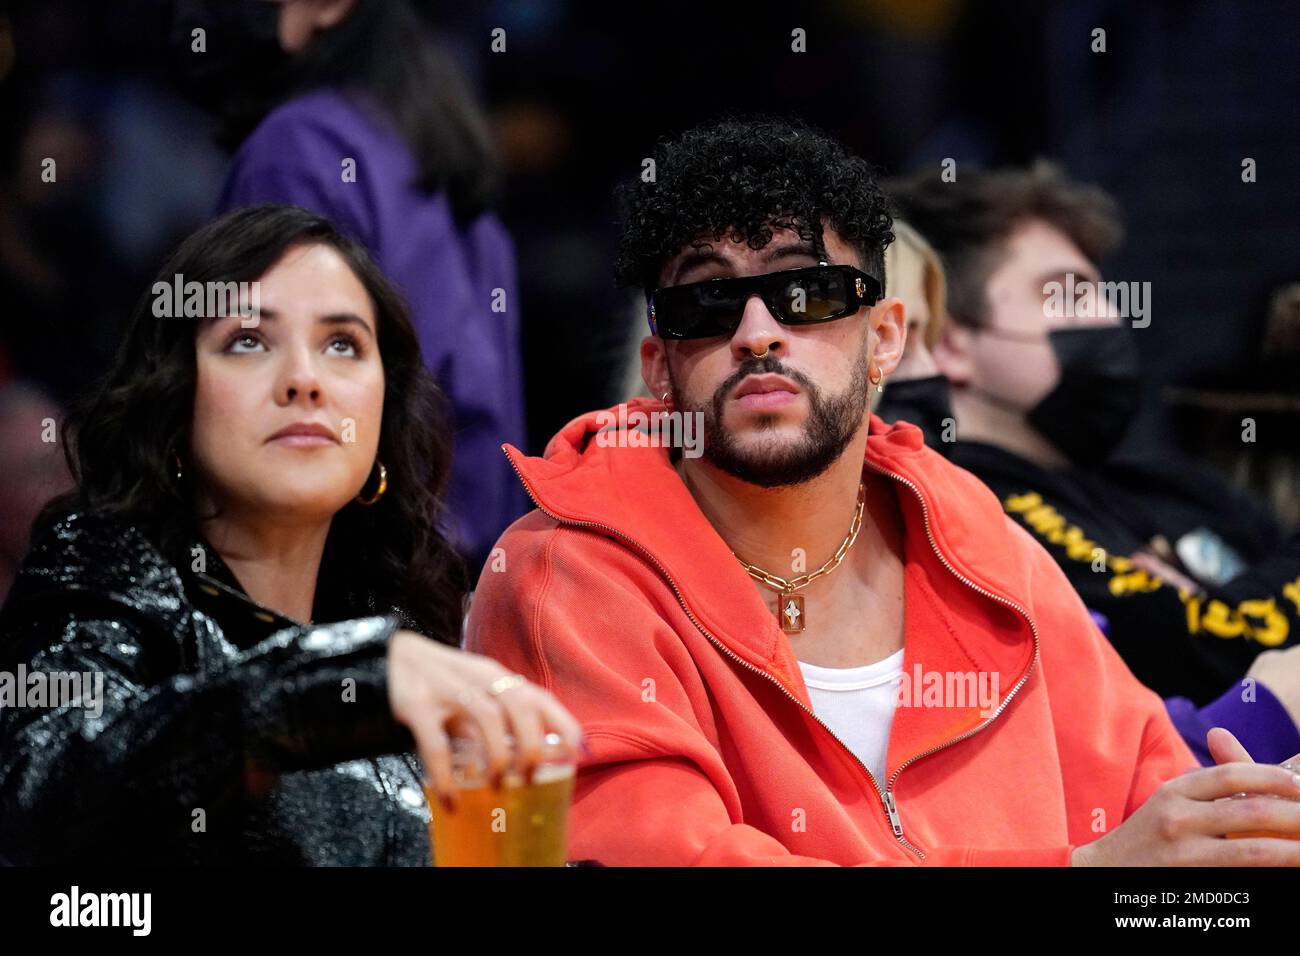 Entertainer Bad Bunny, right, attends during the first half of an